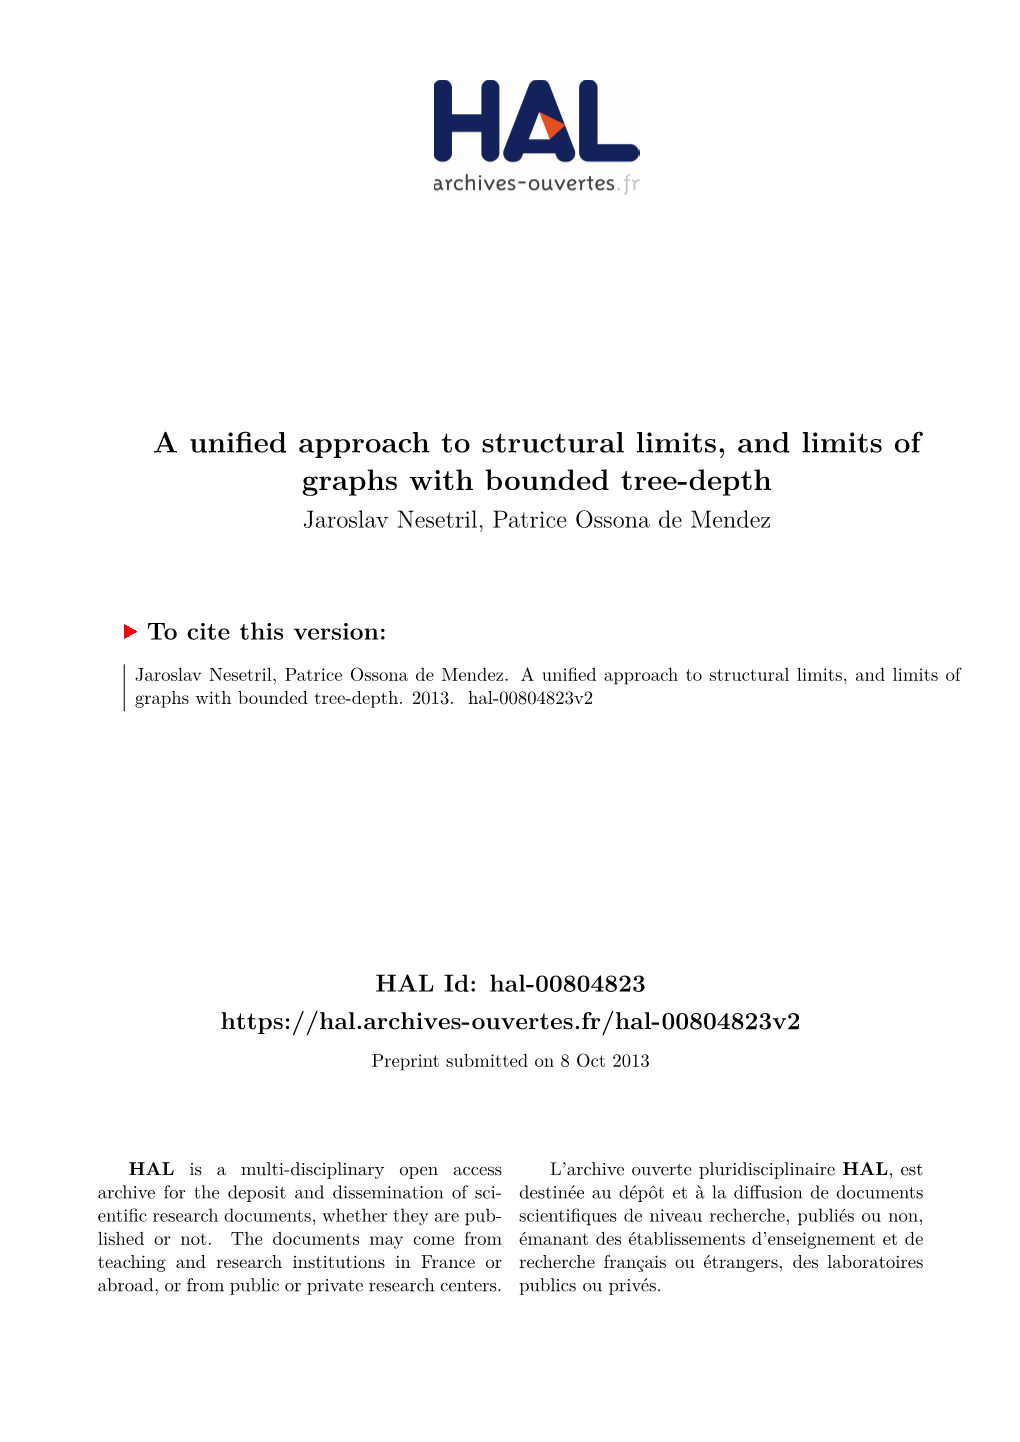 A Unified Approach to Structural Limits, and Limits of Graphs with Bounded Tree-Depth Jaroslav Nesetril, Patrice Ossona De Mendez